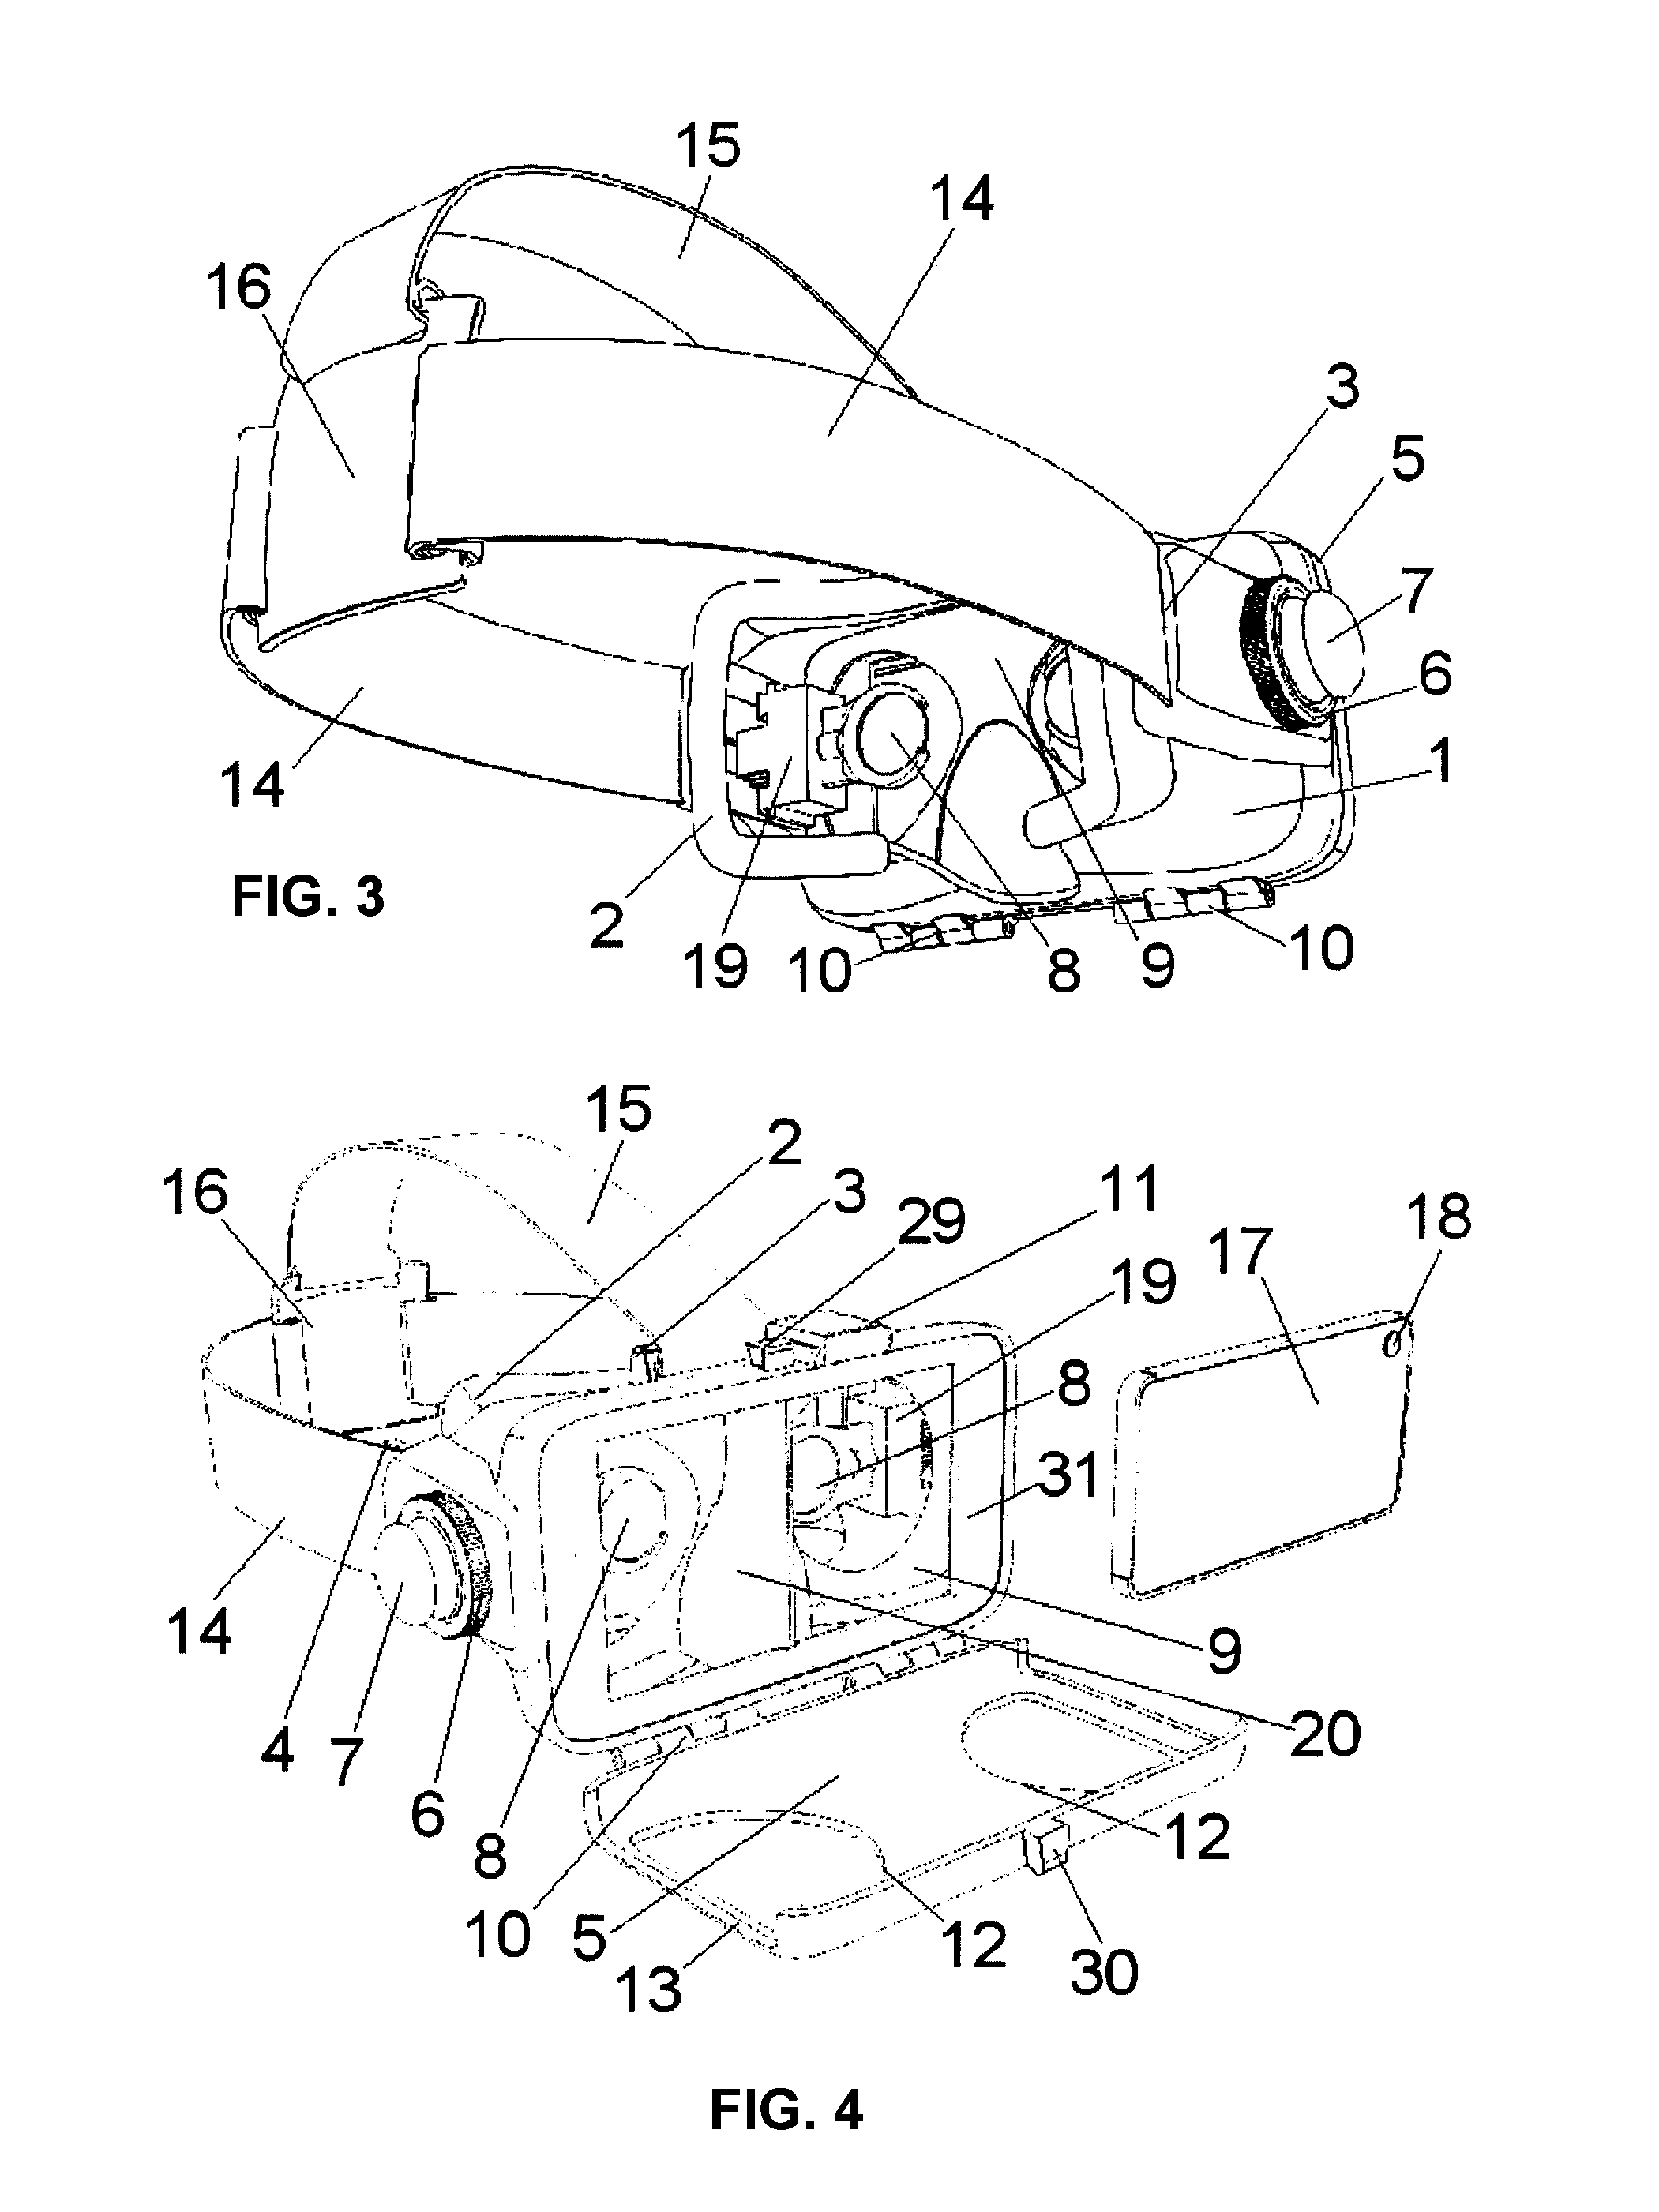 Graphic display adapter device for mobile virtual stereoscopic vision